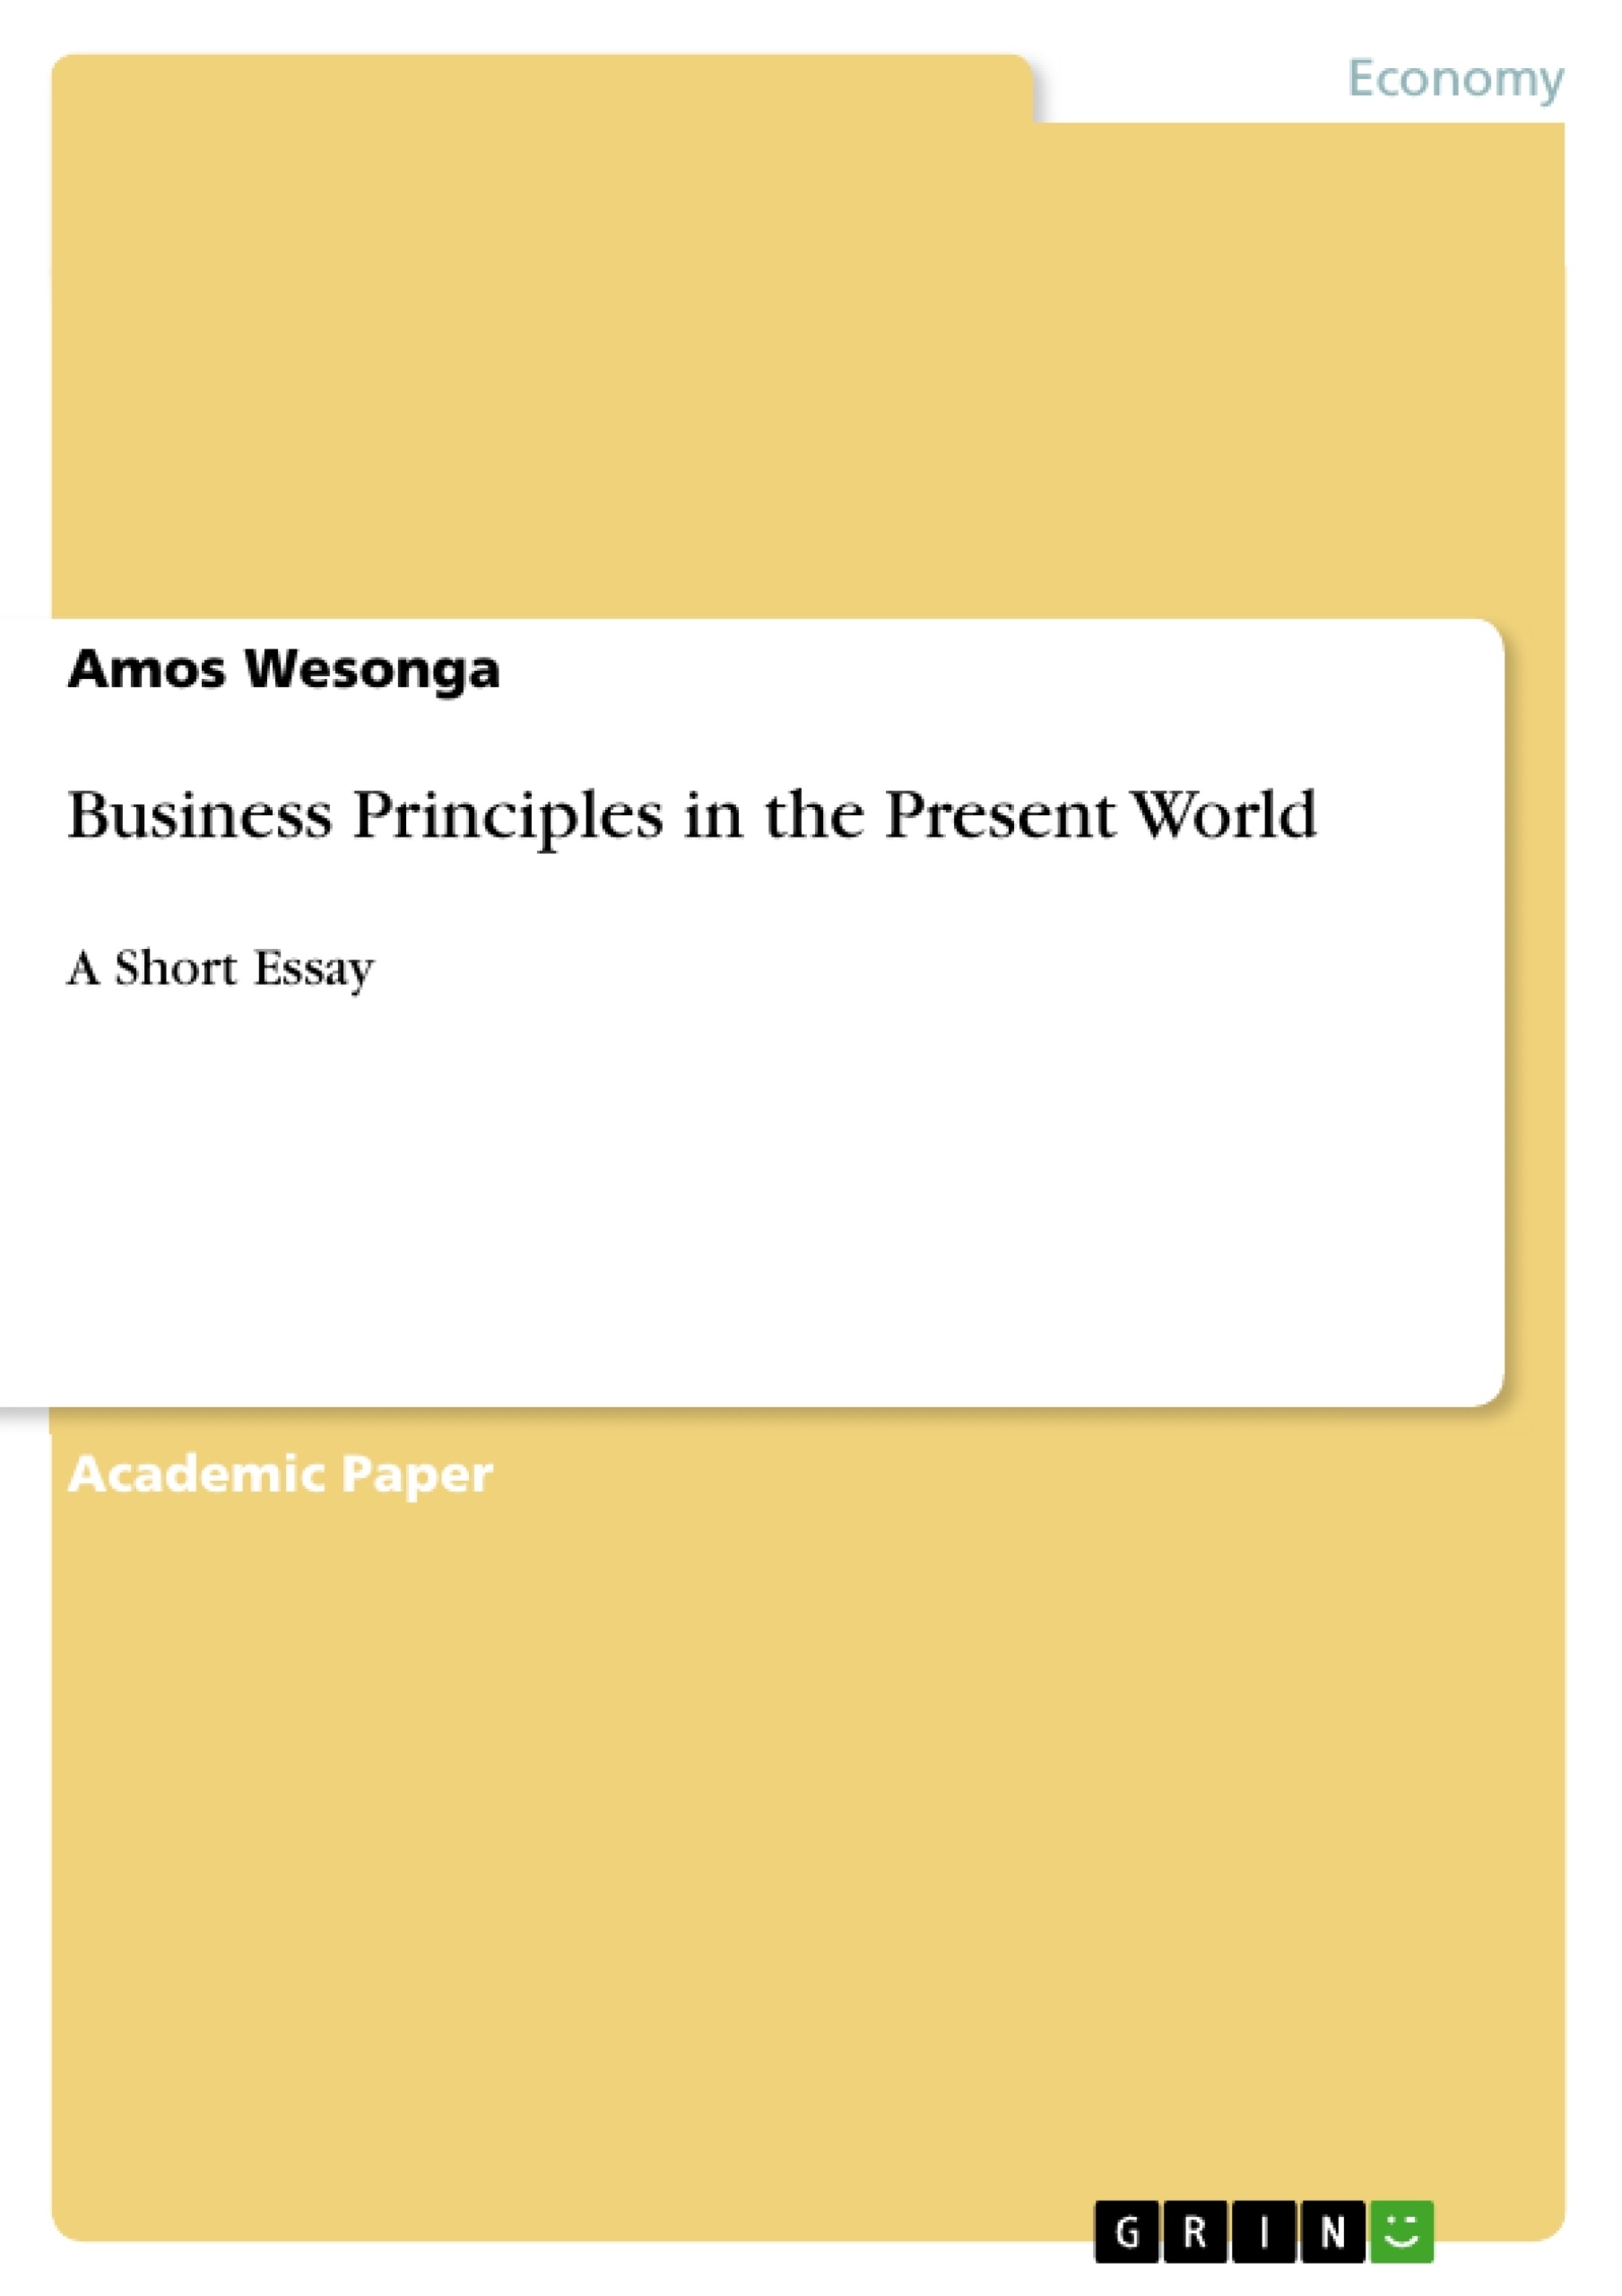 Title: Business Principles in the Present World